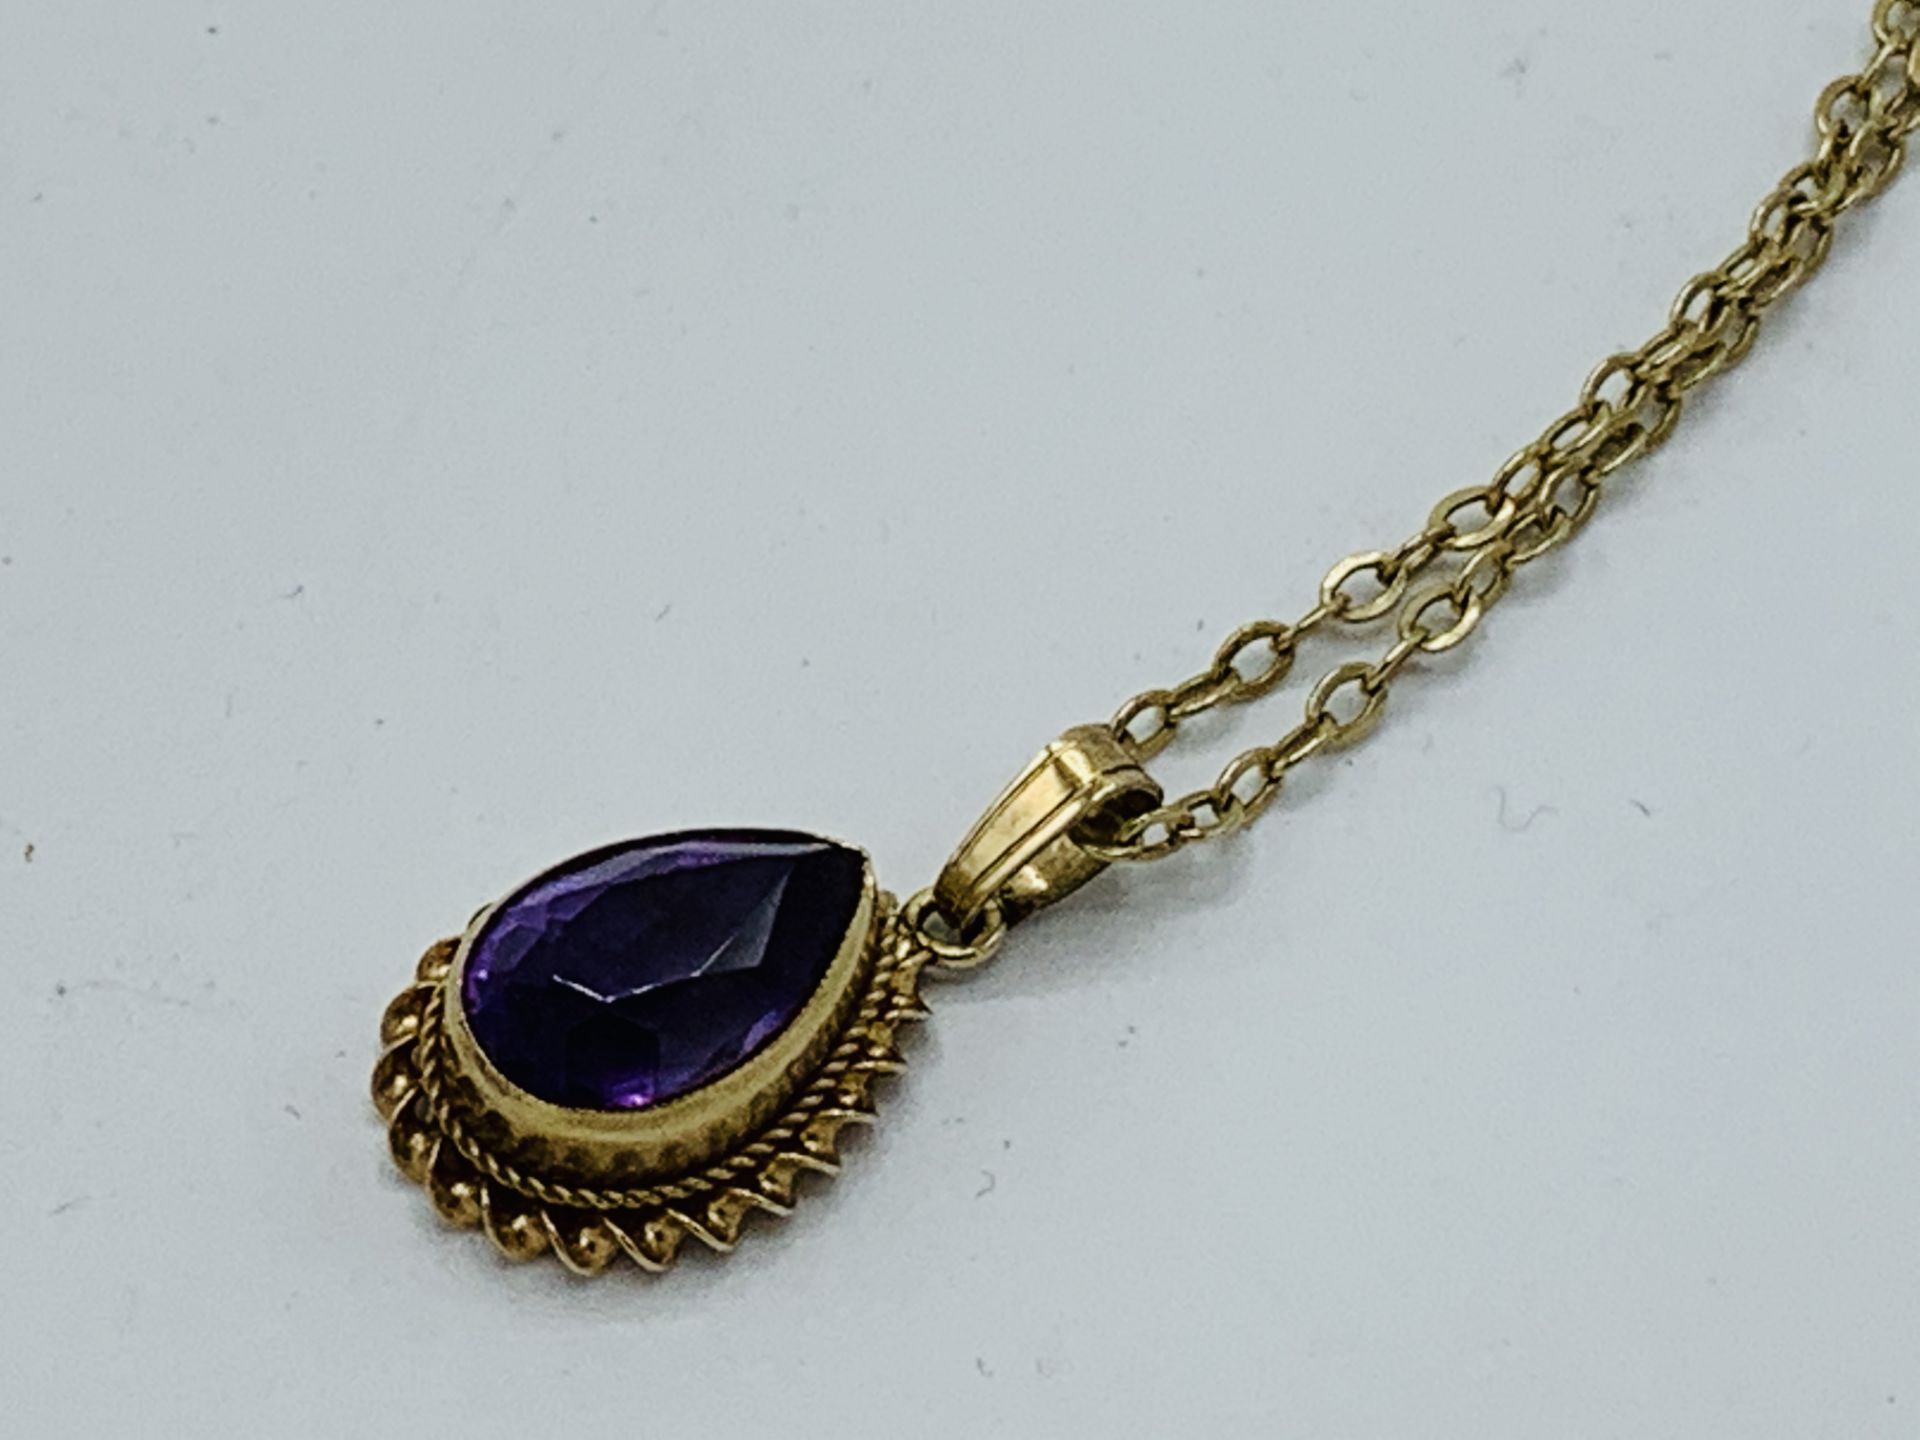 9ct yellow gold amethyst necklace. Estimate £30-40. - Image 2 of 3